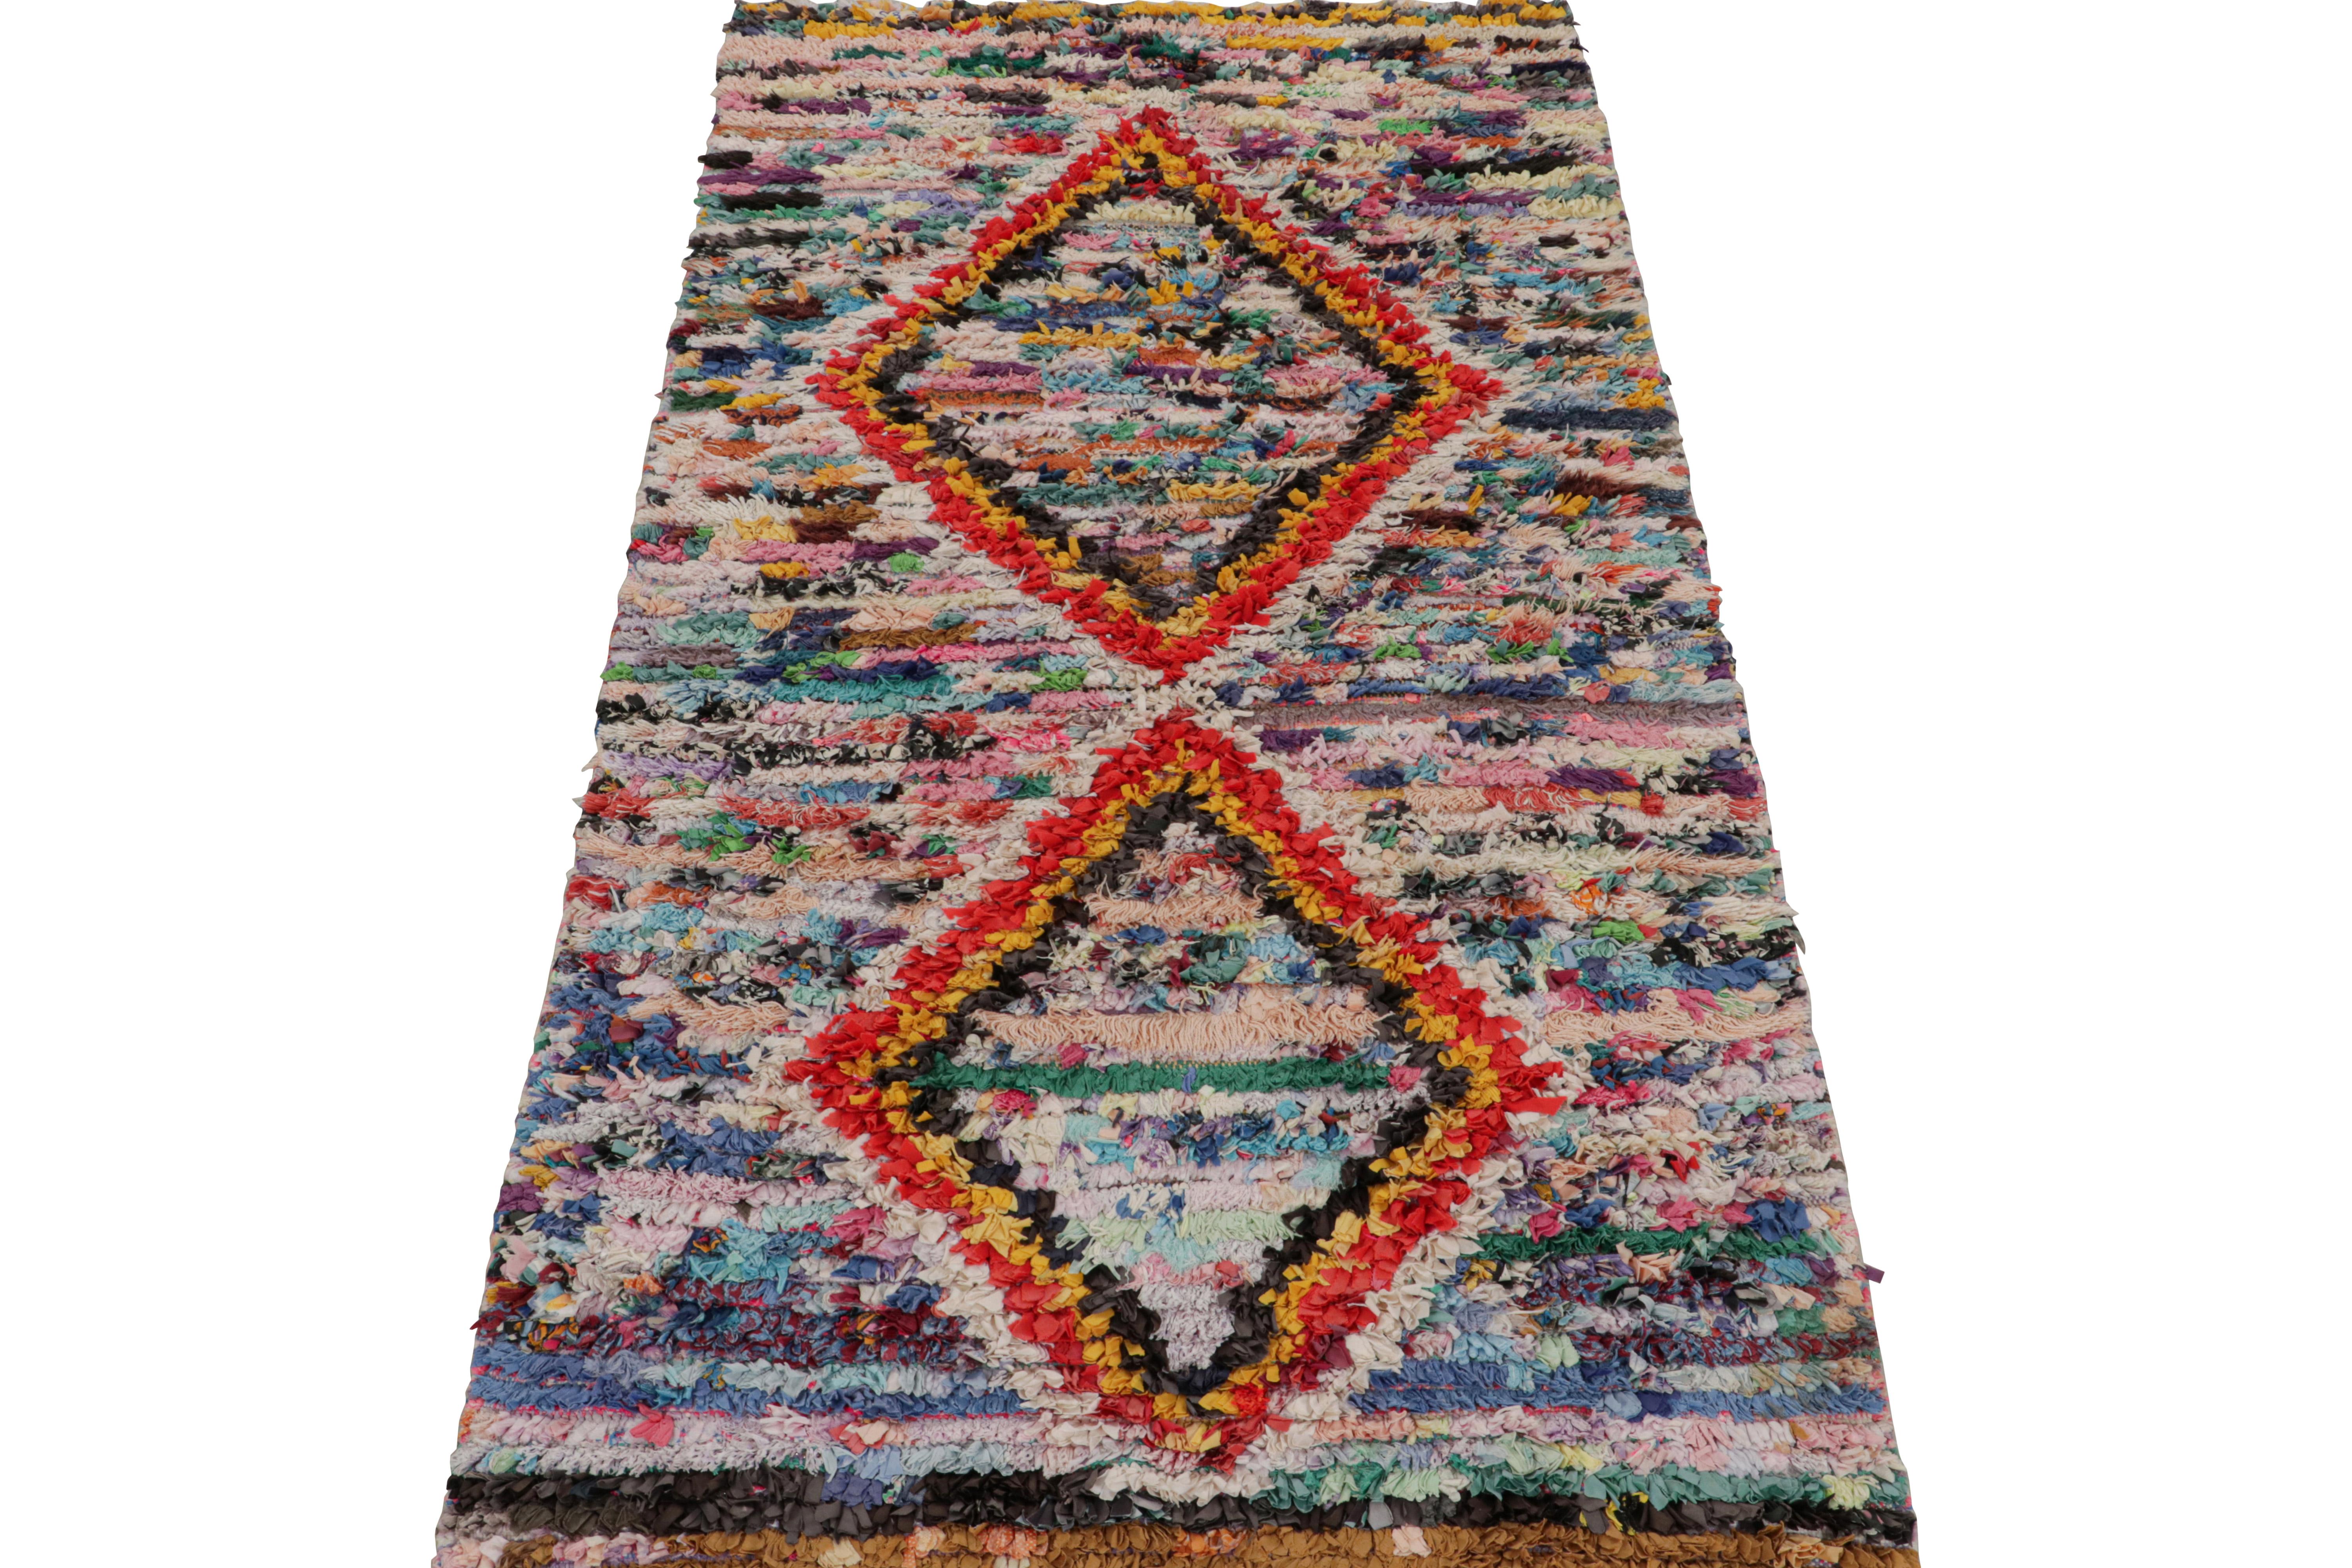 Tribal 1950s Azilal Moroccan Runner rug with Polychromatic Patterns by Rug & Kilim For Sale